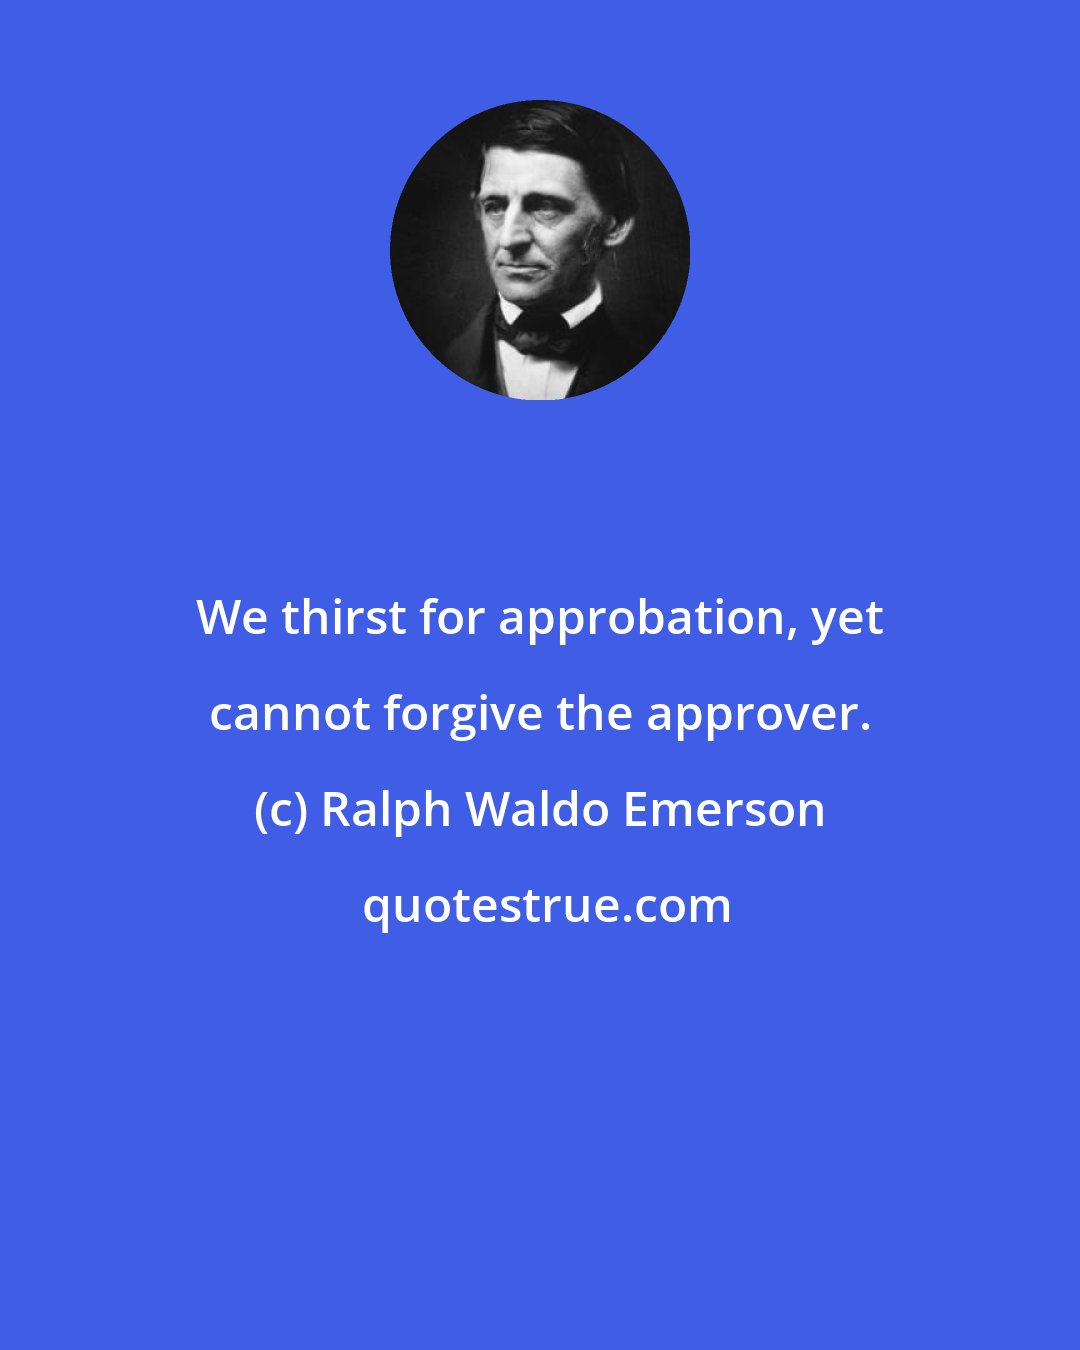 Ralph Waldo Emerson: We thirst for approbation, yet cannot forgive the approver.